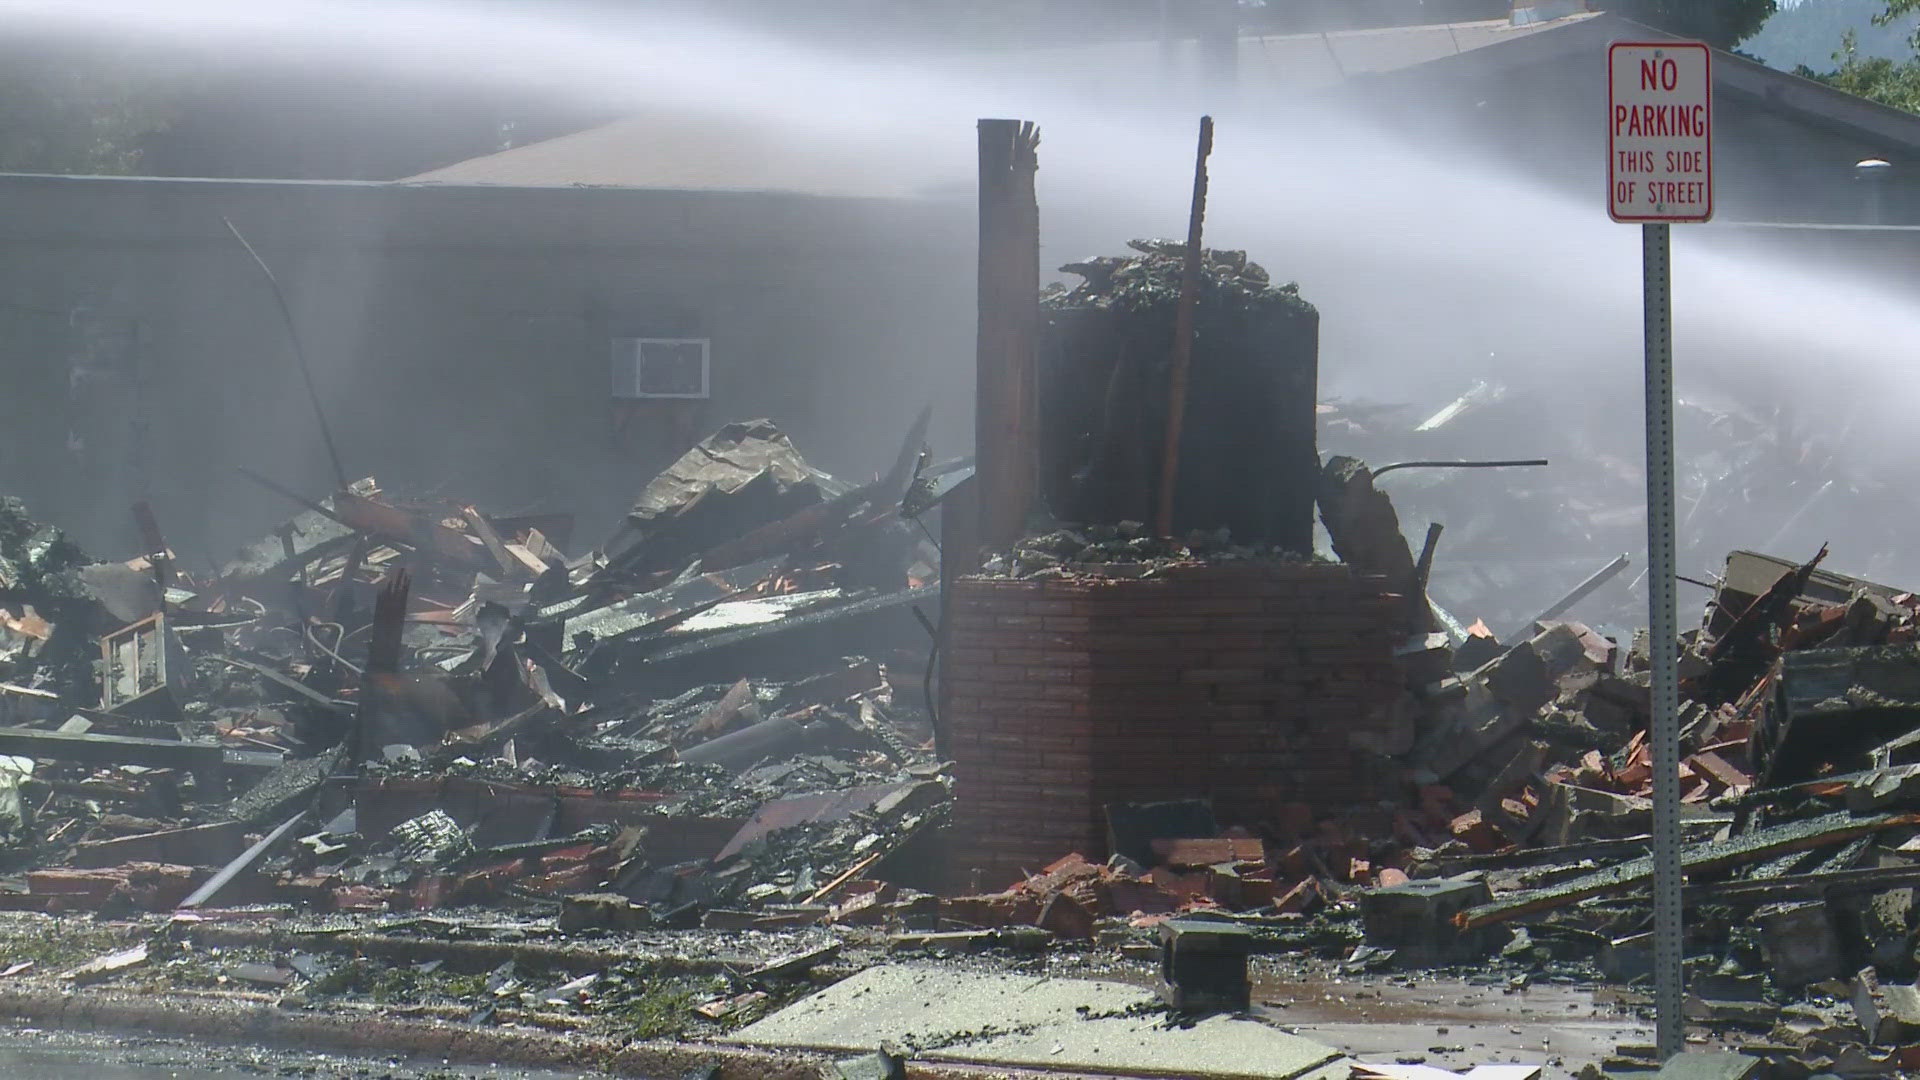 The owner of the store says the building is a complete loss.